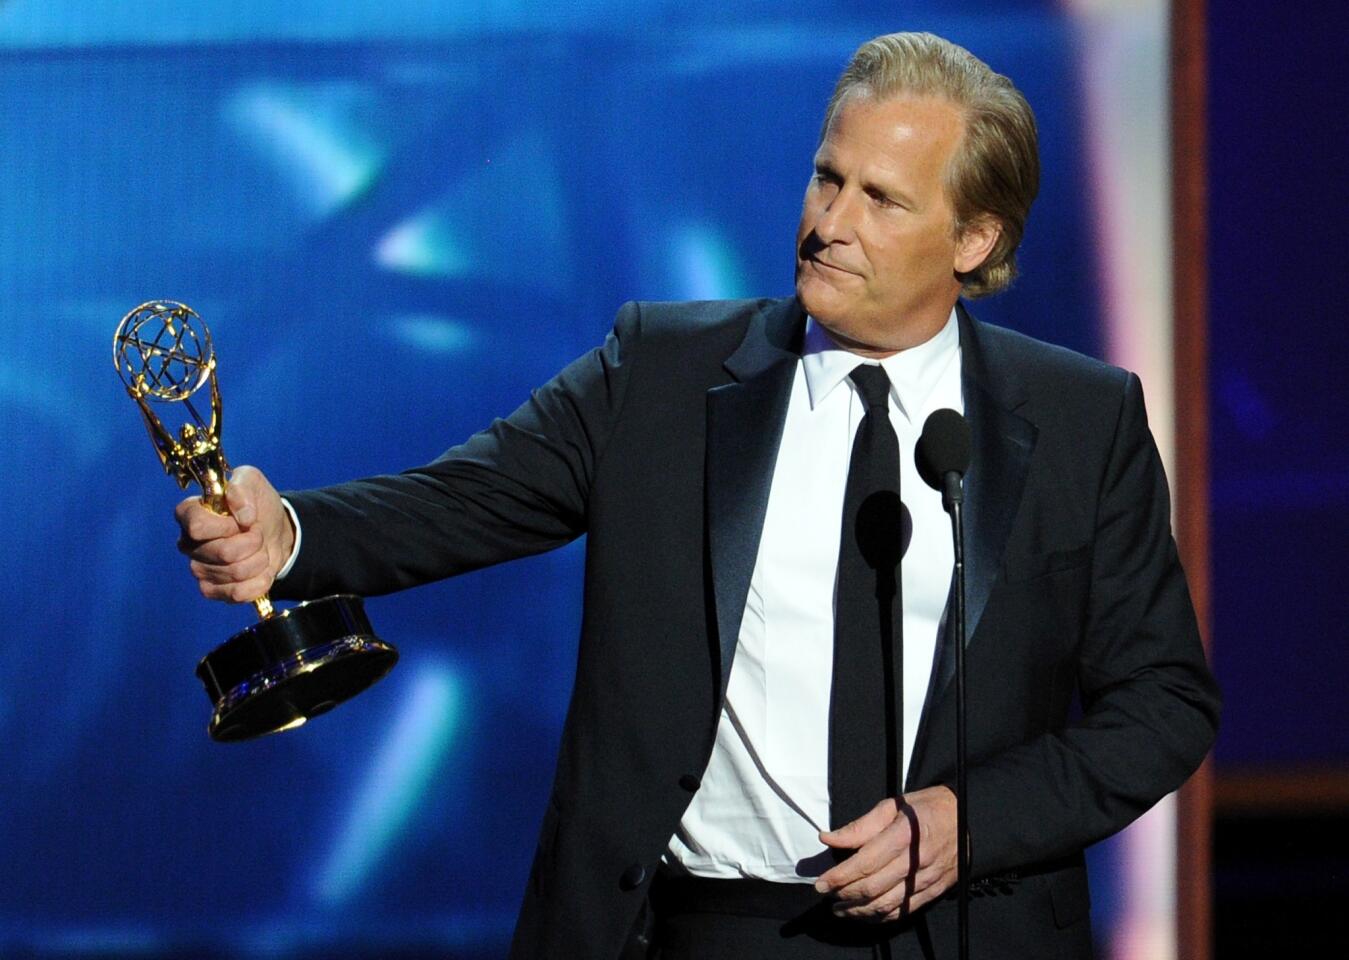 Jeff Daniels wins Emmy for best actor in a drama